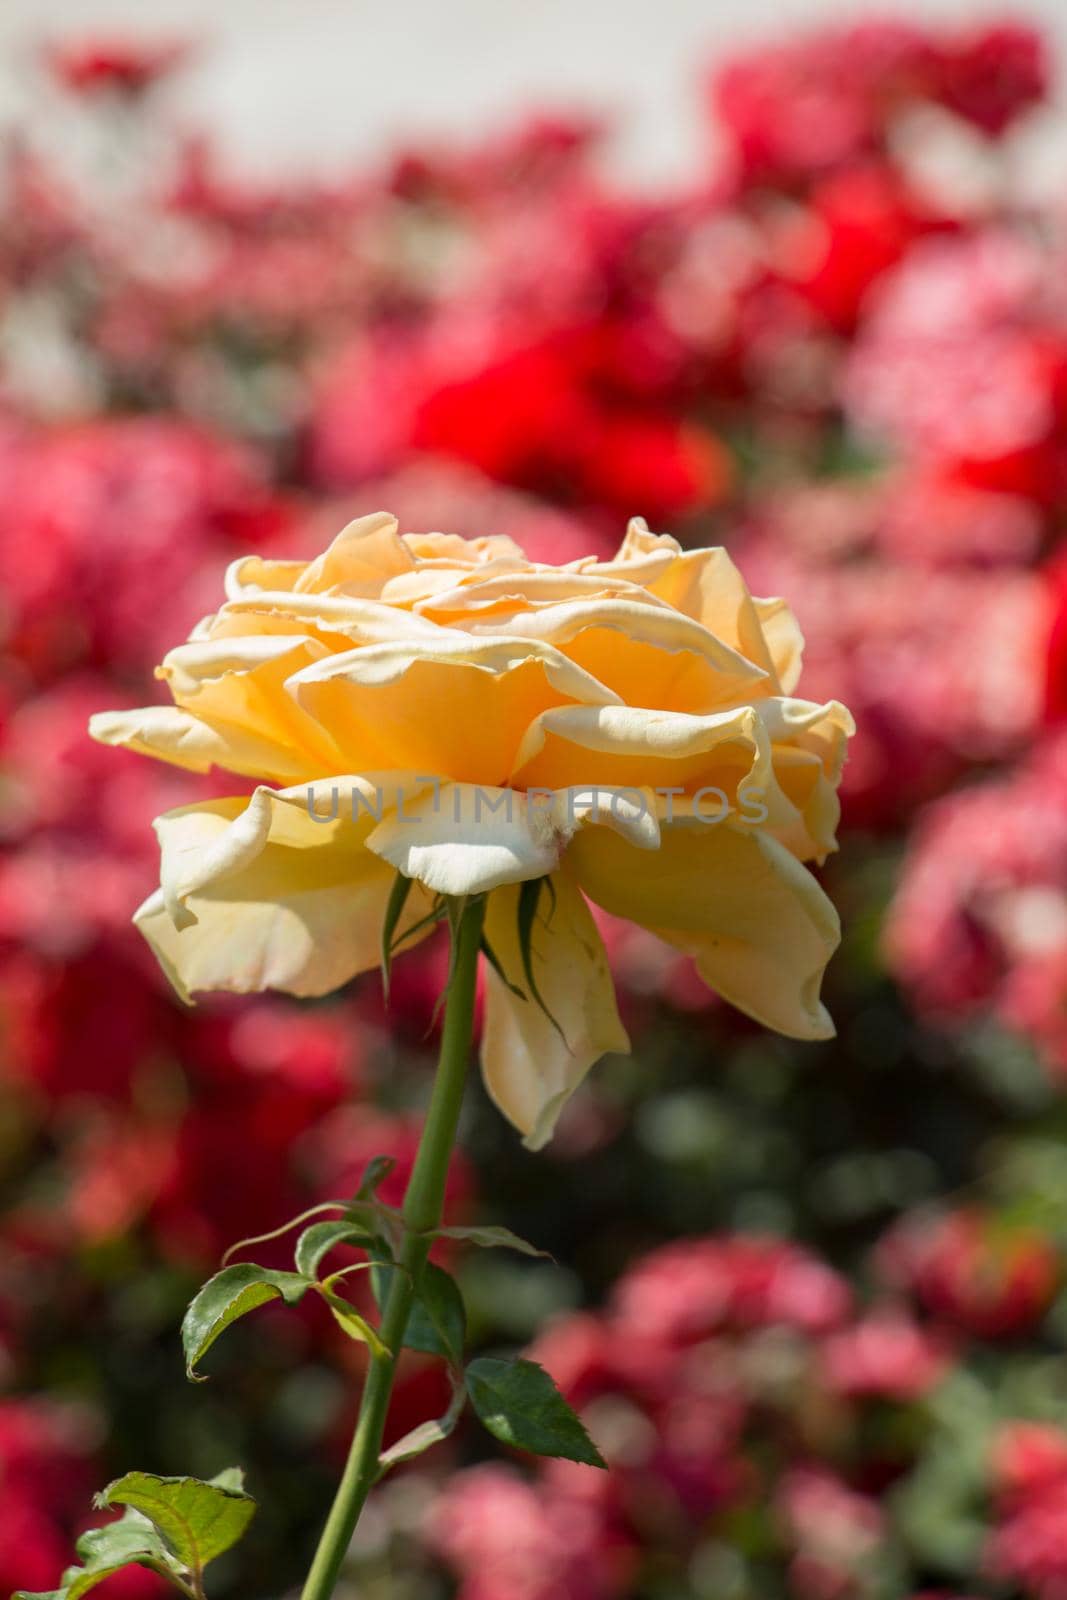 Blooming beautiful colorful rose in garden nature background